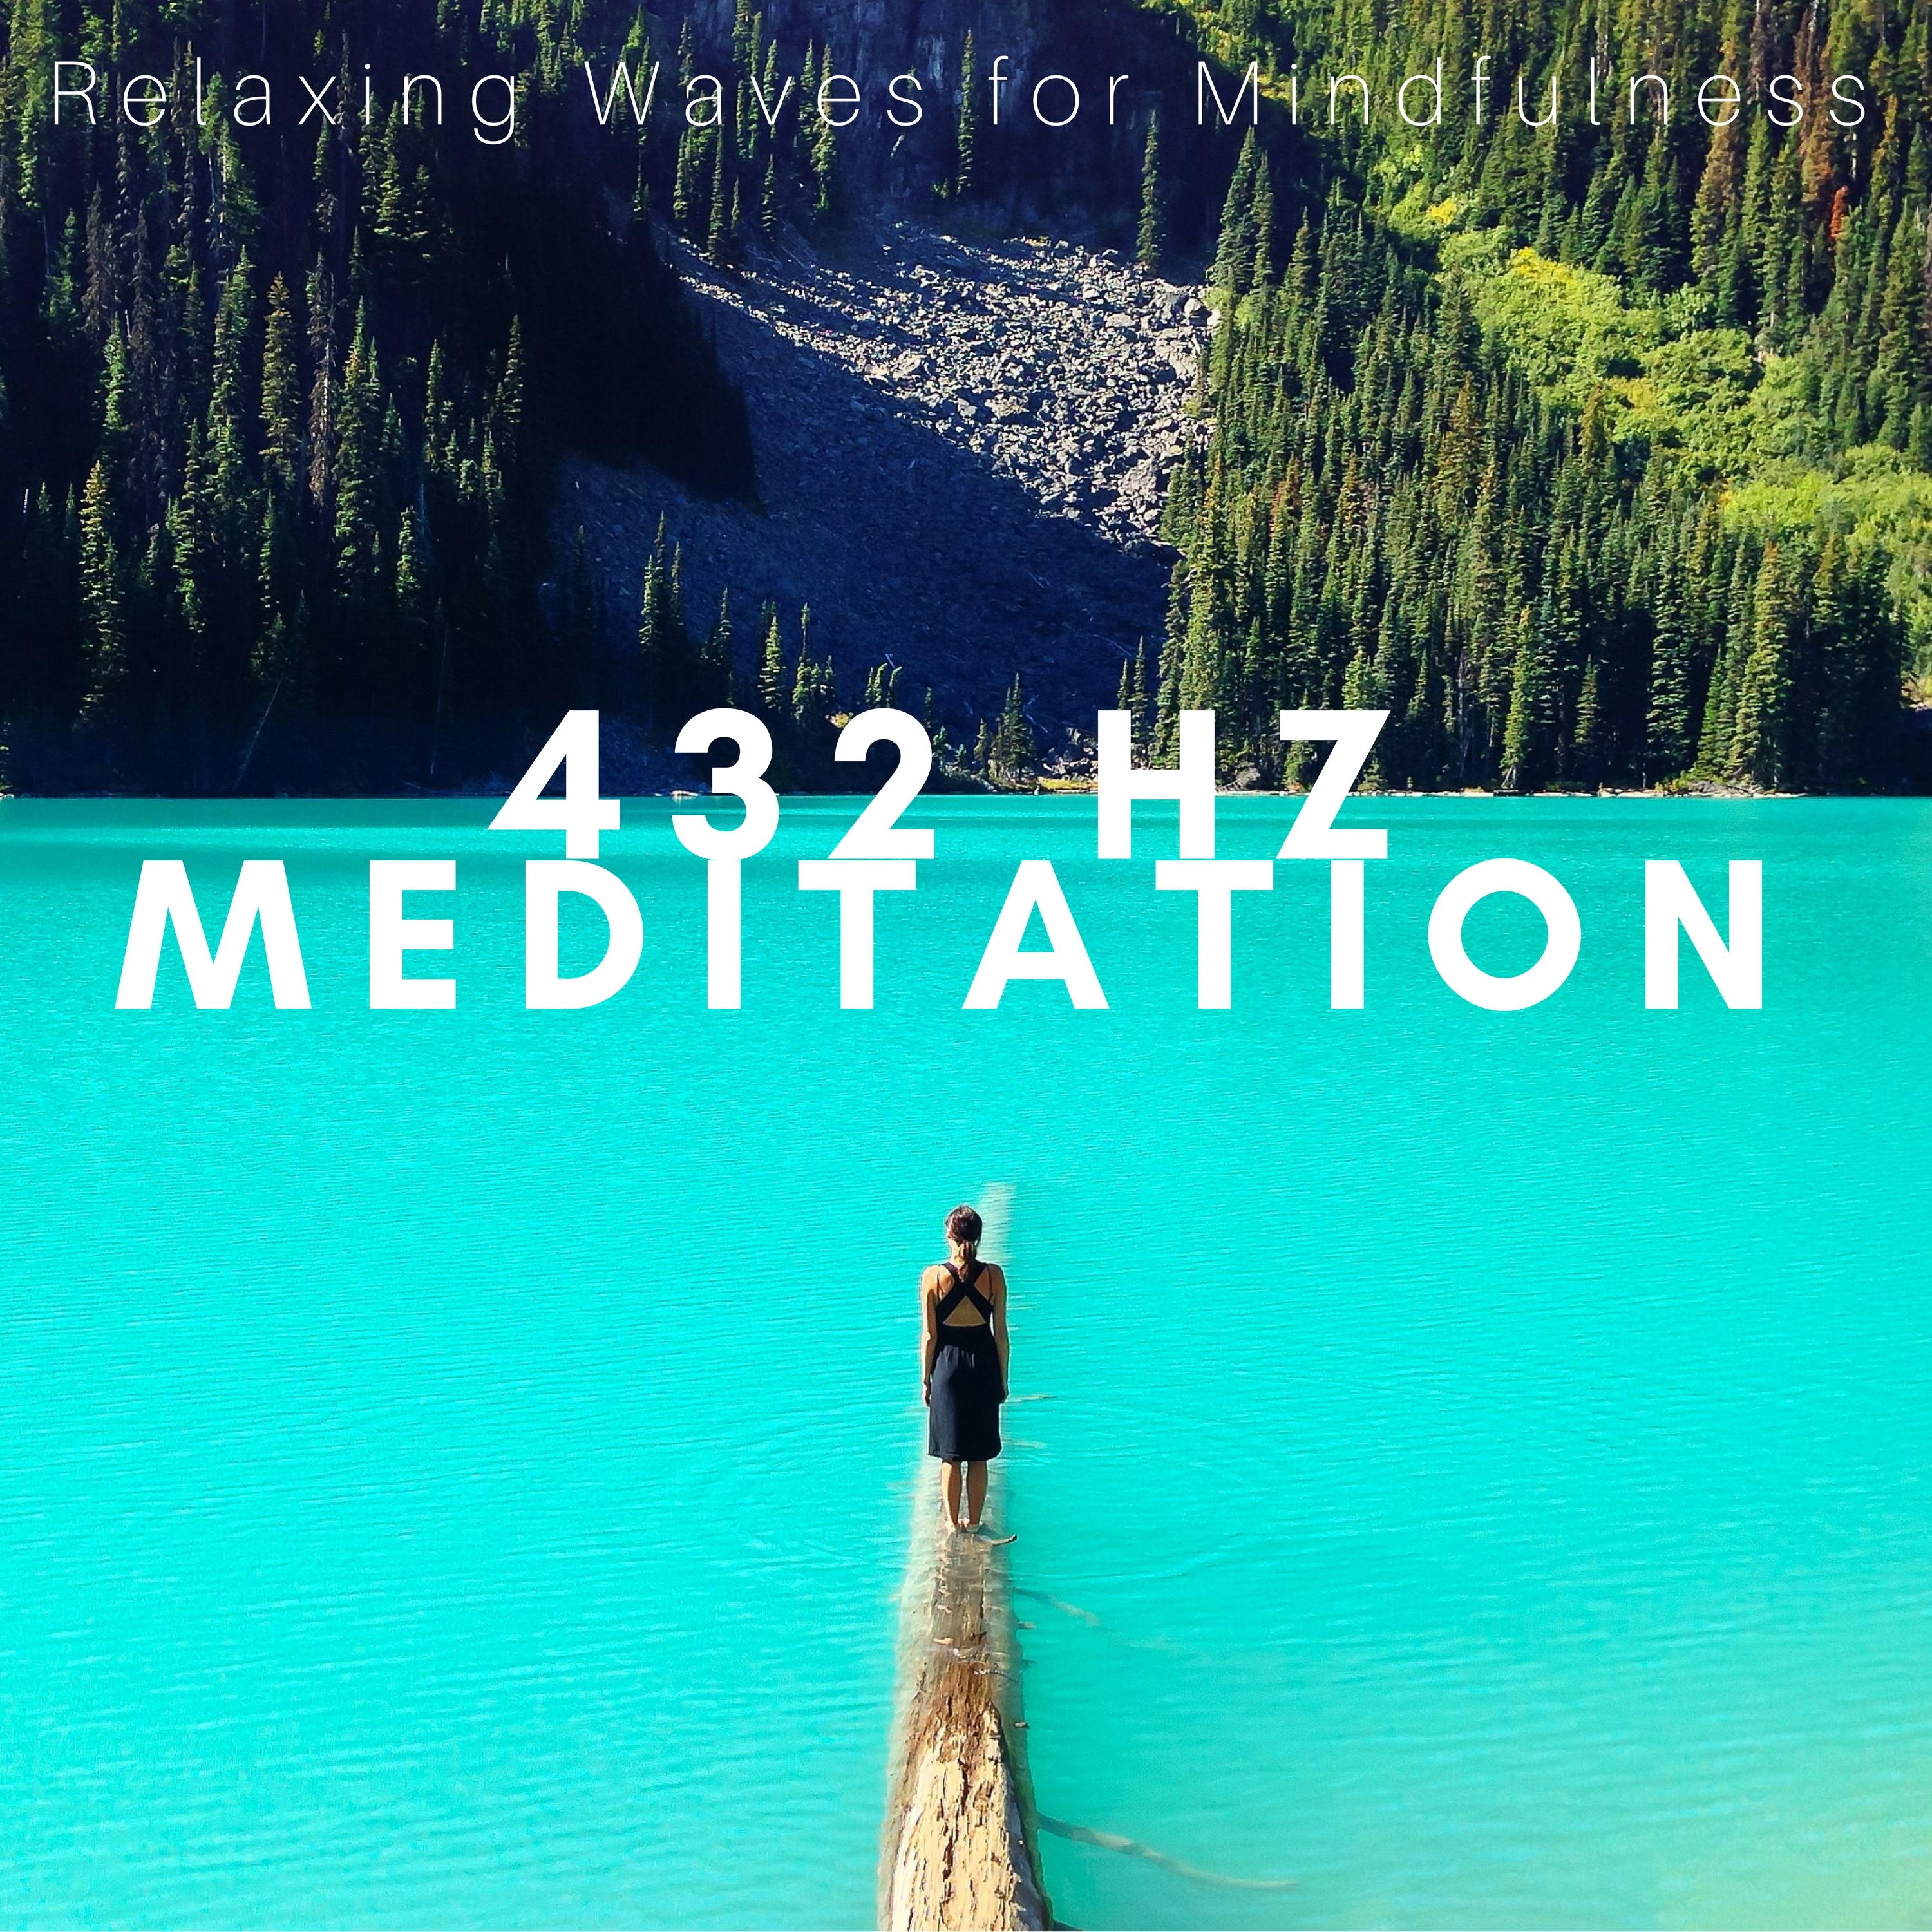 New Age Meditation Song